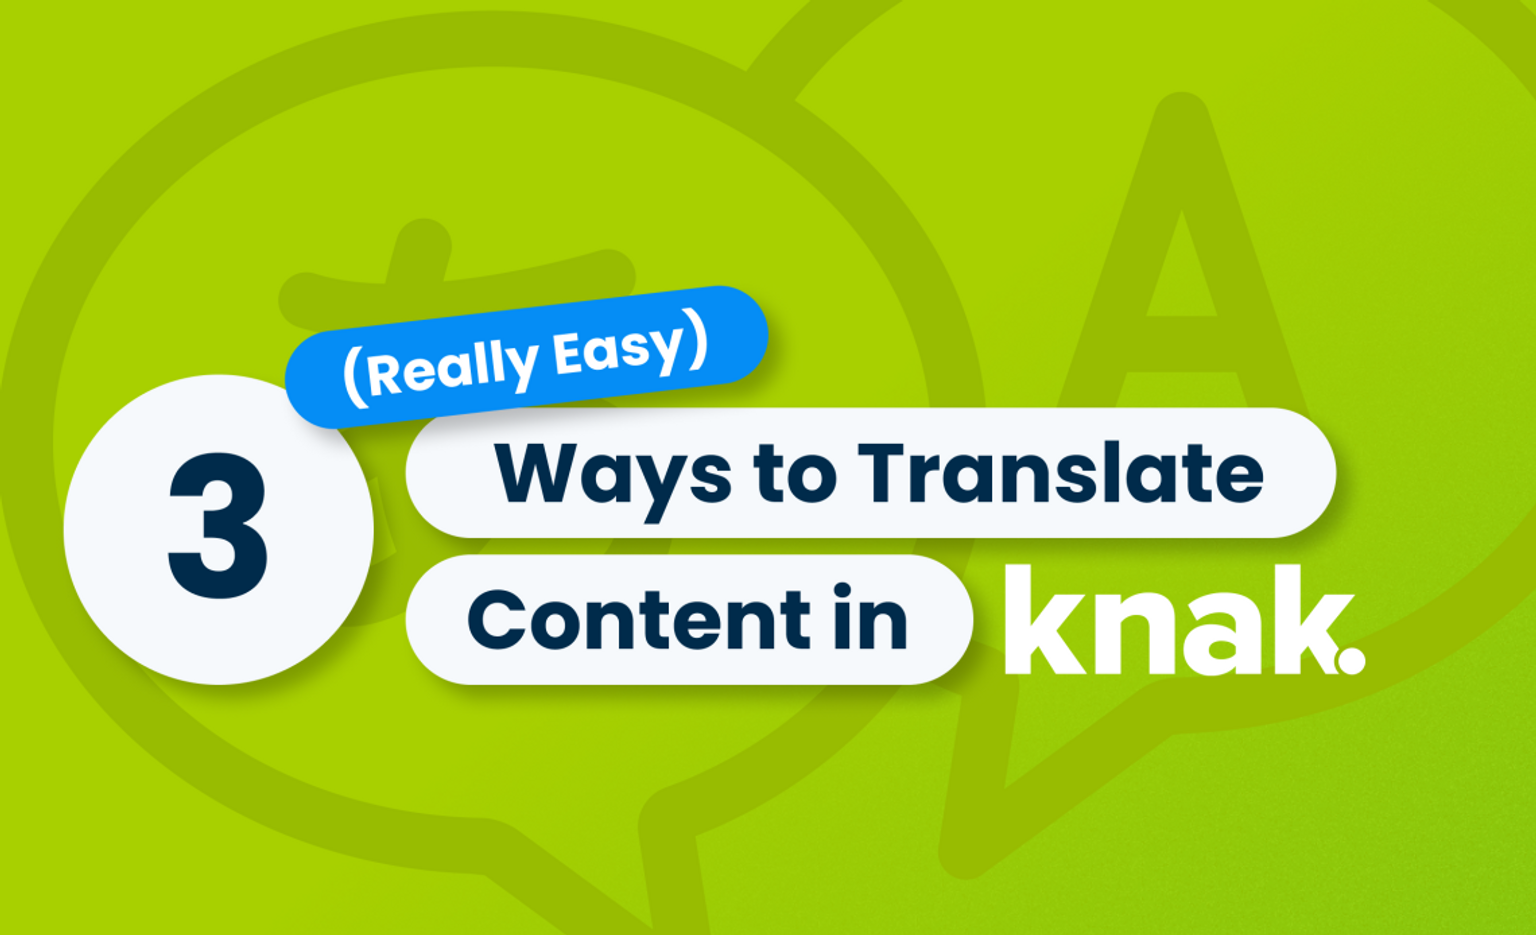 3 (Really Easy) Ways to Translate Content in Knak